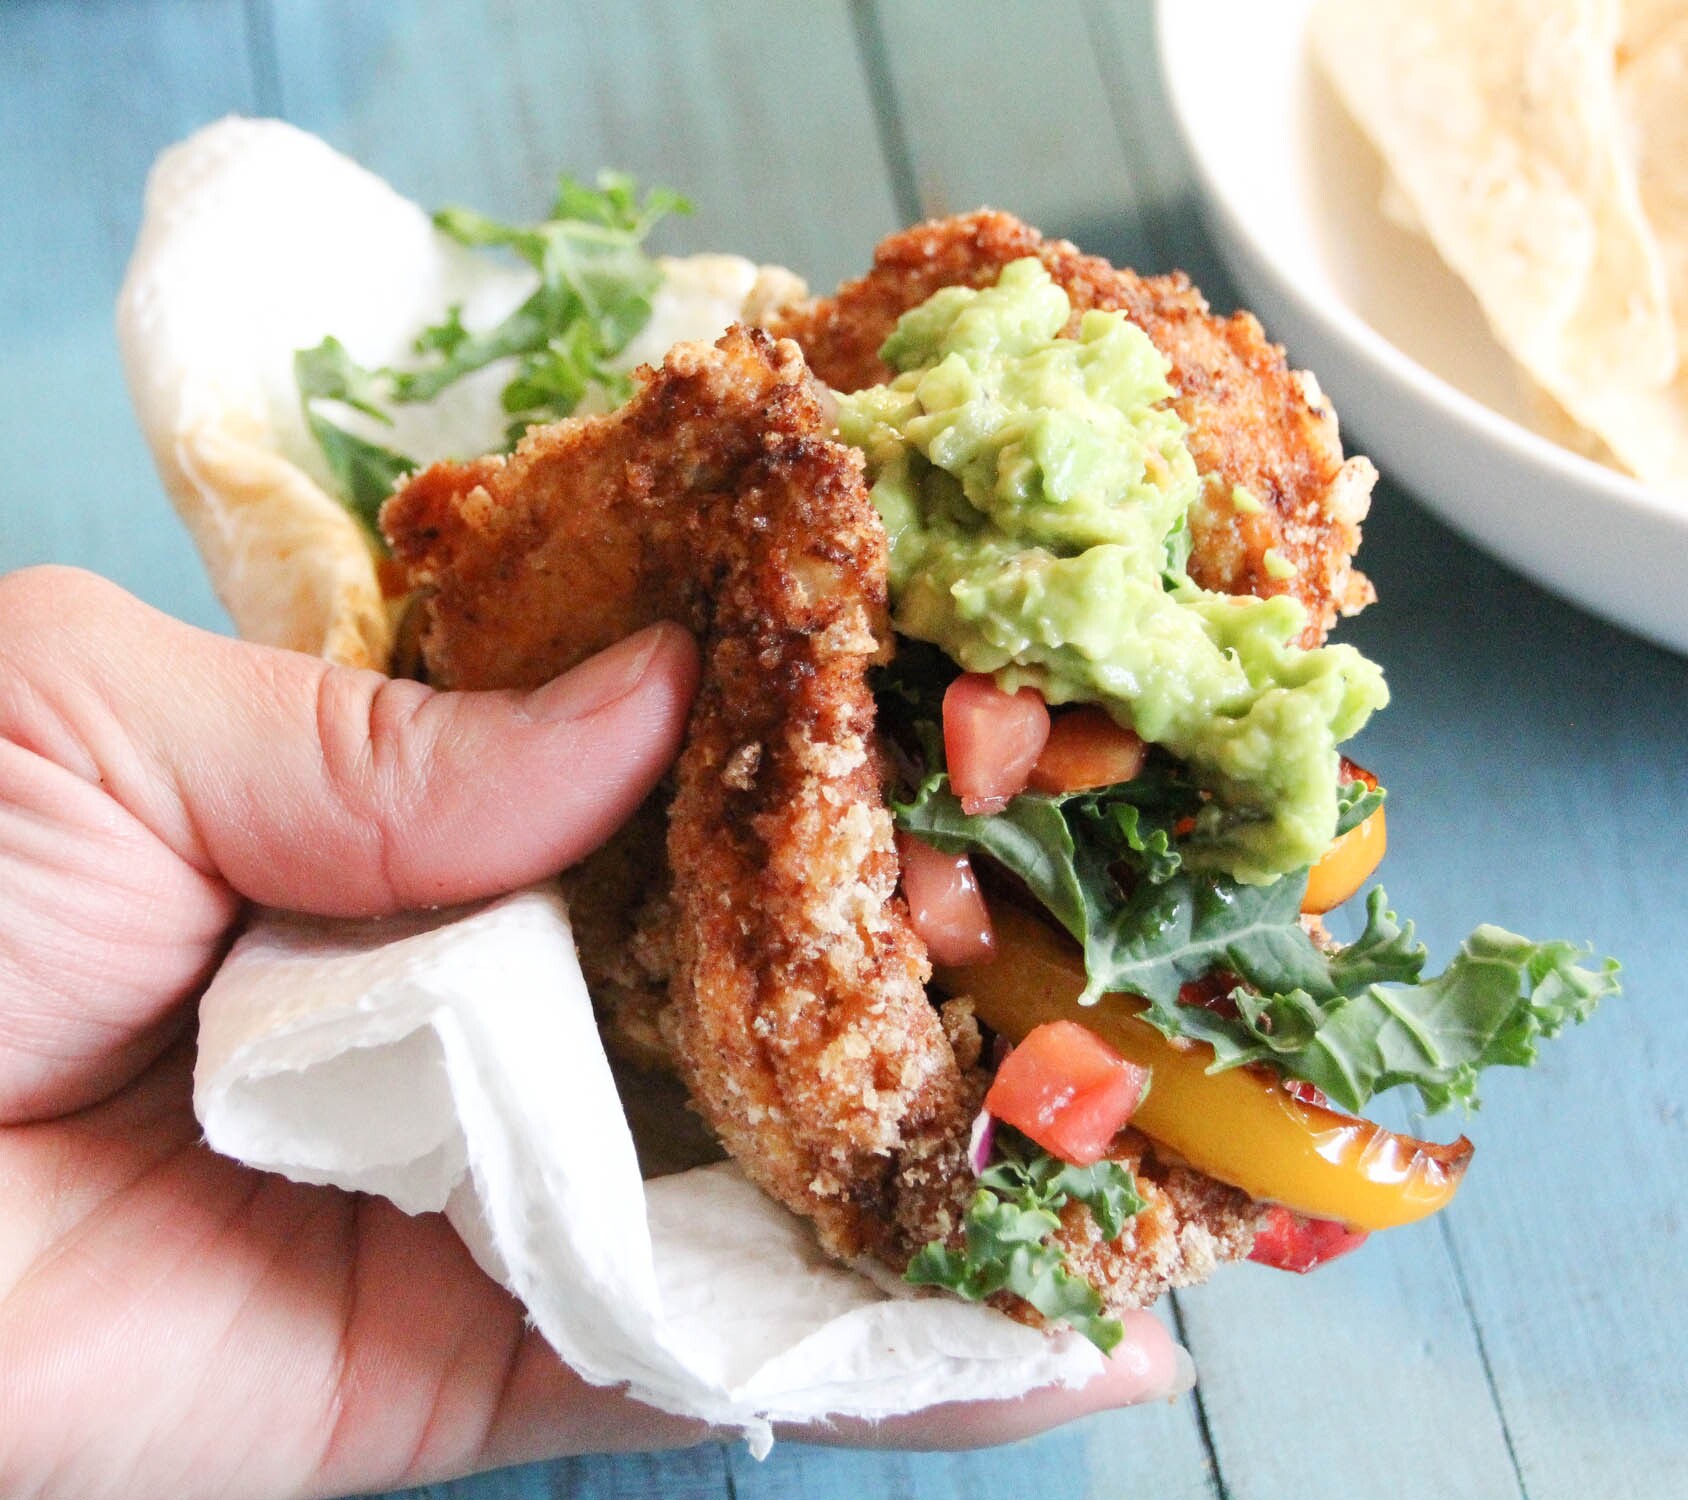 Filled with your favorite veggie toppings, this Keto Fried Chicken Taco Shell has taken tacos or a chalupa to the next level.   You only need 5-ingredients to make this low-carb Keto Taco Shell that will change your life.  